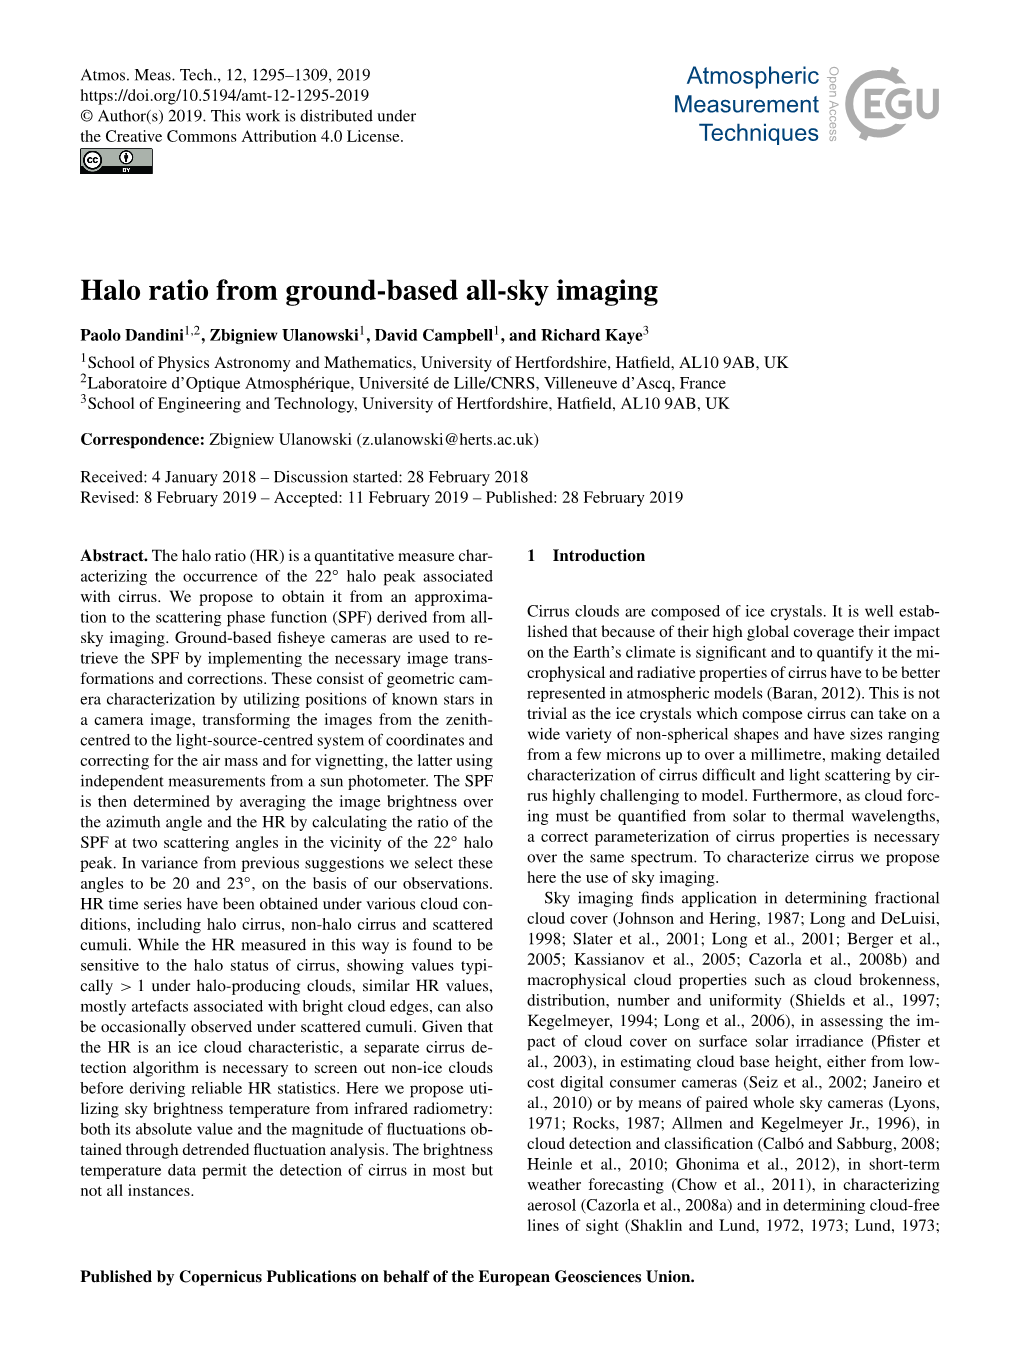 Halo Ratio from Ground-Based All-Sky Imaging